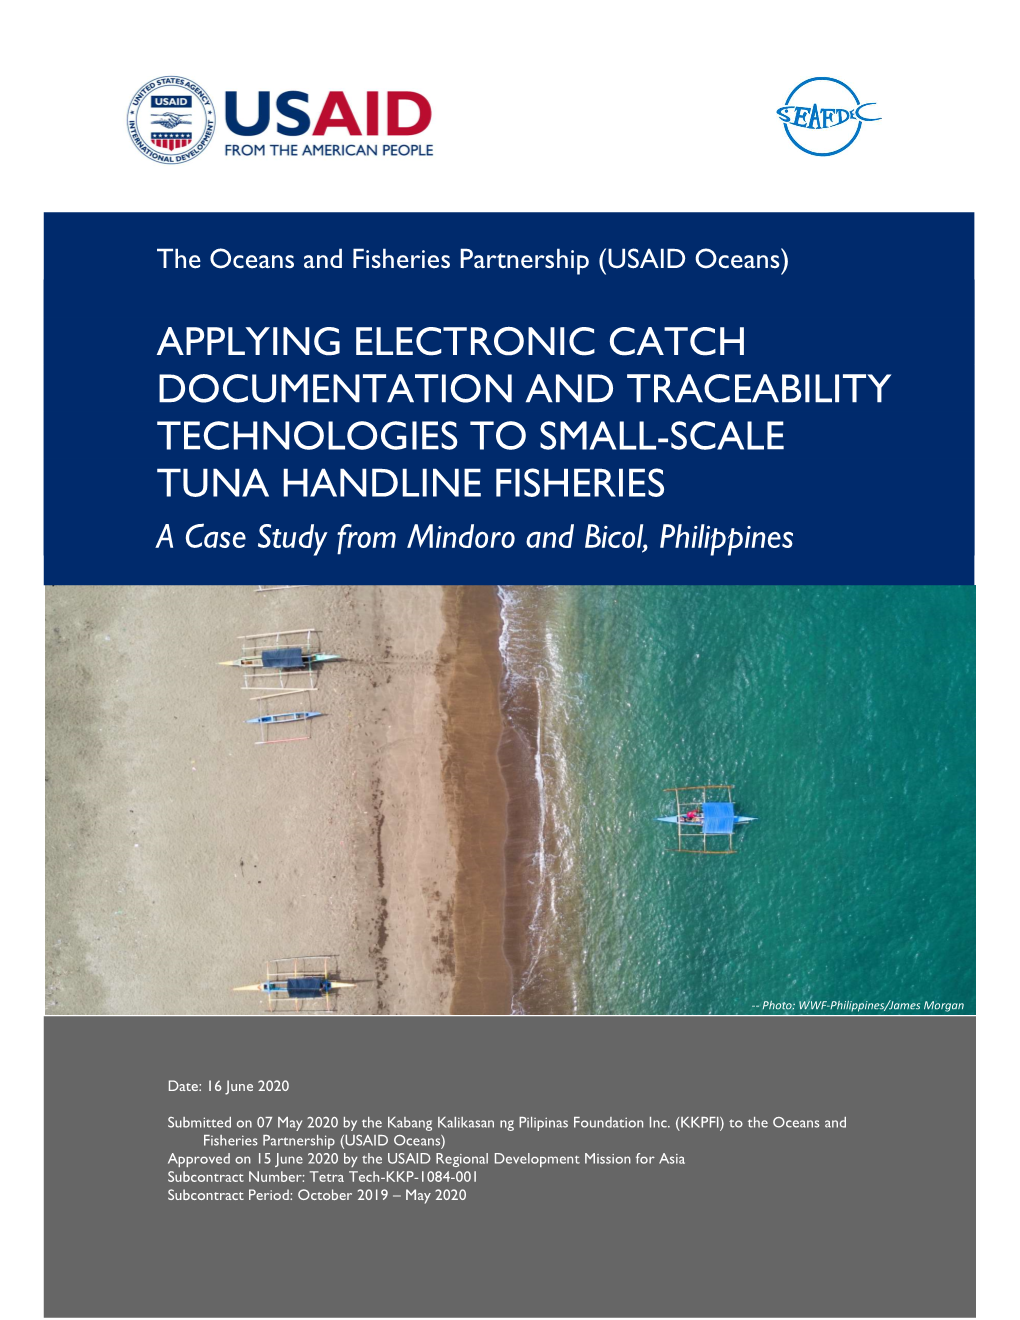 APPLYING ELECTRONIC CATCH DOCUMENTATION and TRACEABILITY TECHNOLOGIES to SMALL-SCALE TUNA HANDLINE FISHERIES a Case Study from Mindoro and Bicol, Philippines